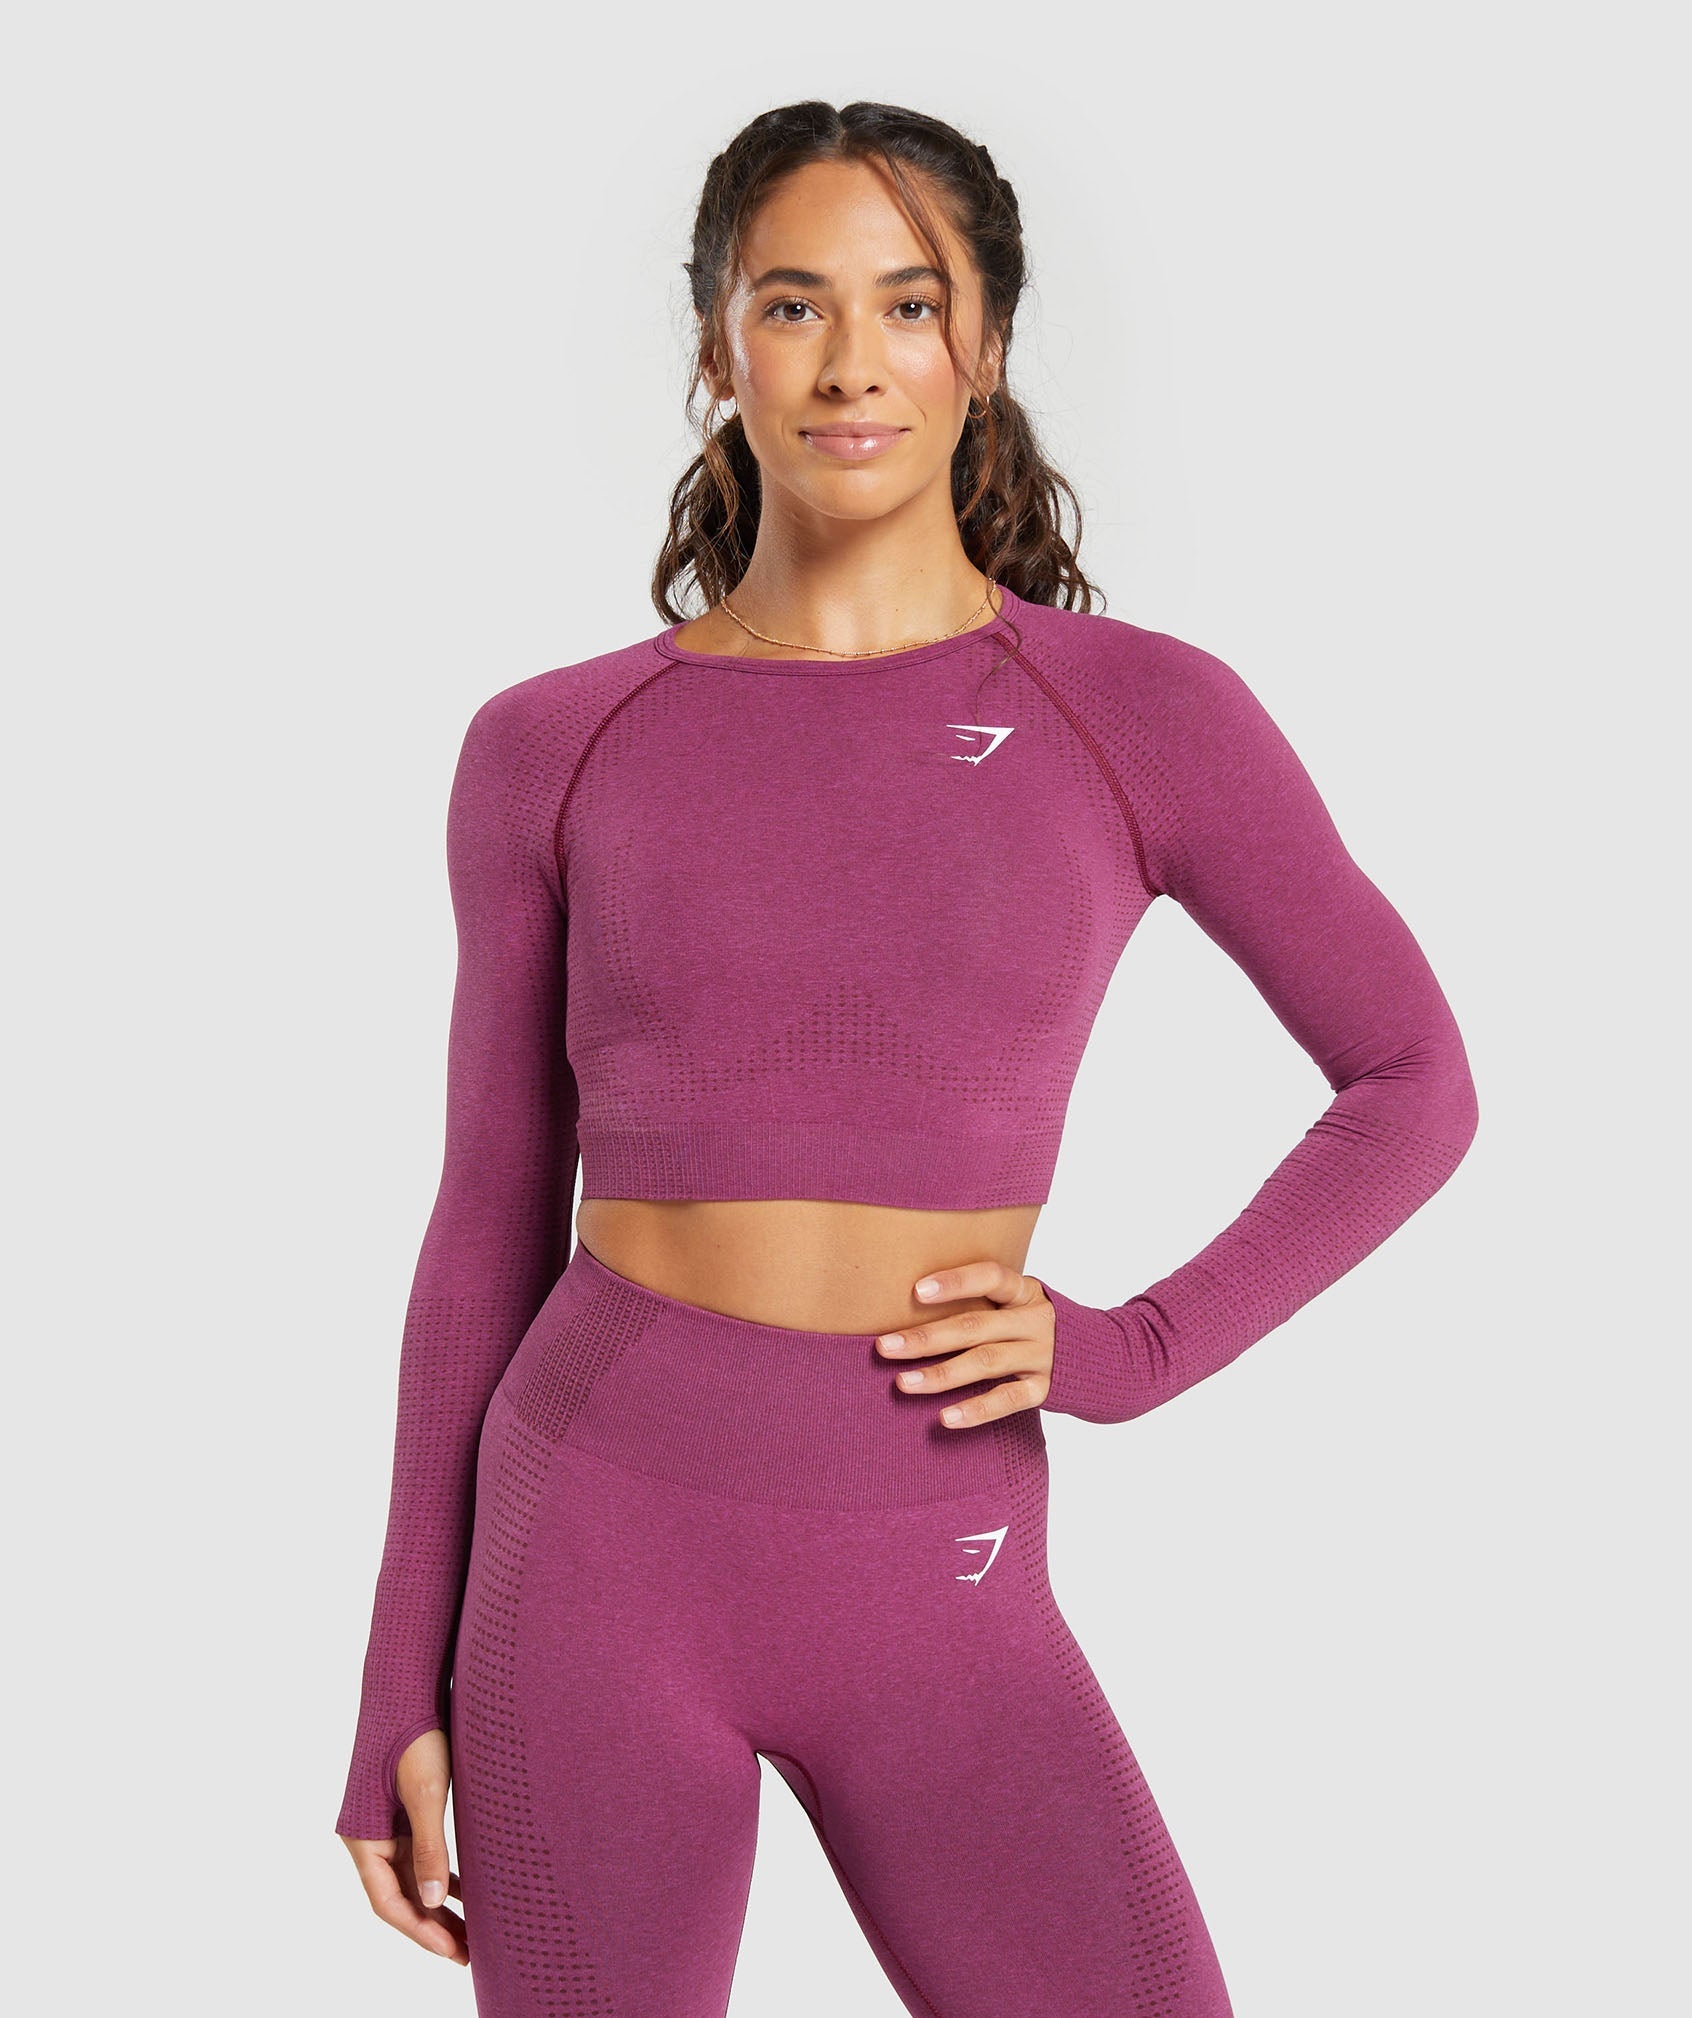 GYMSHARK Gymshark FIT CYCLING - Cuissard Femme moss grey/olive